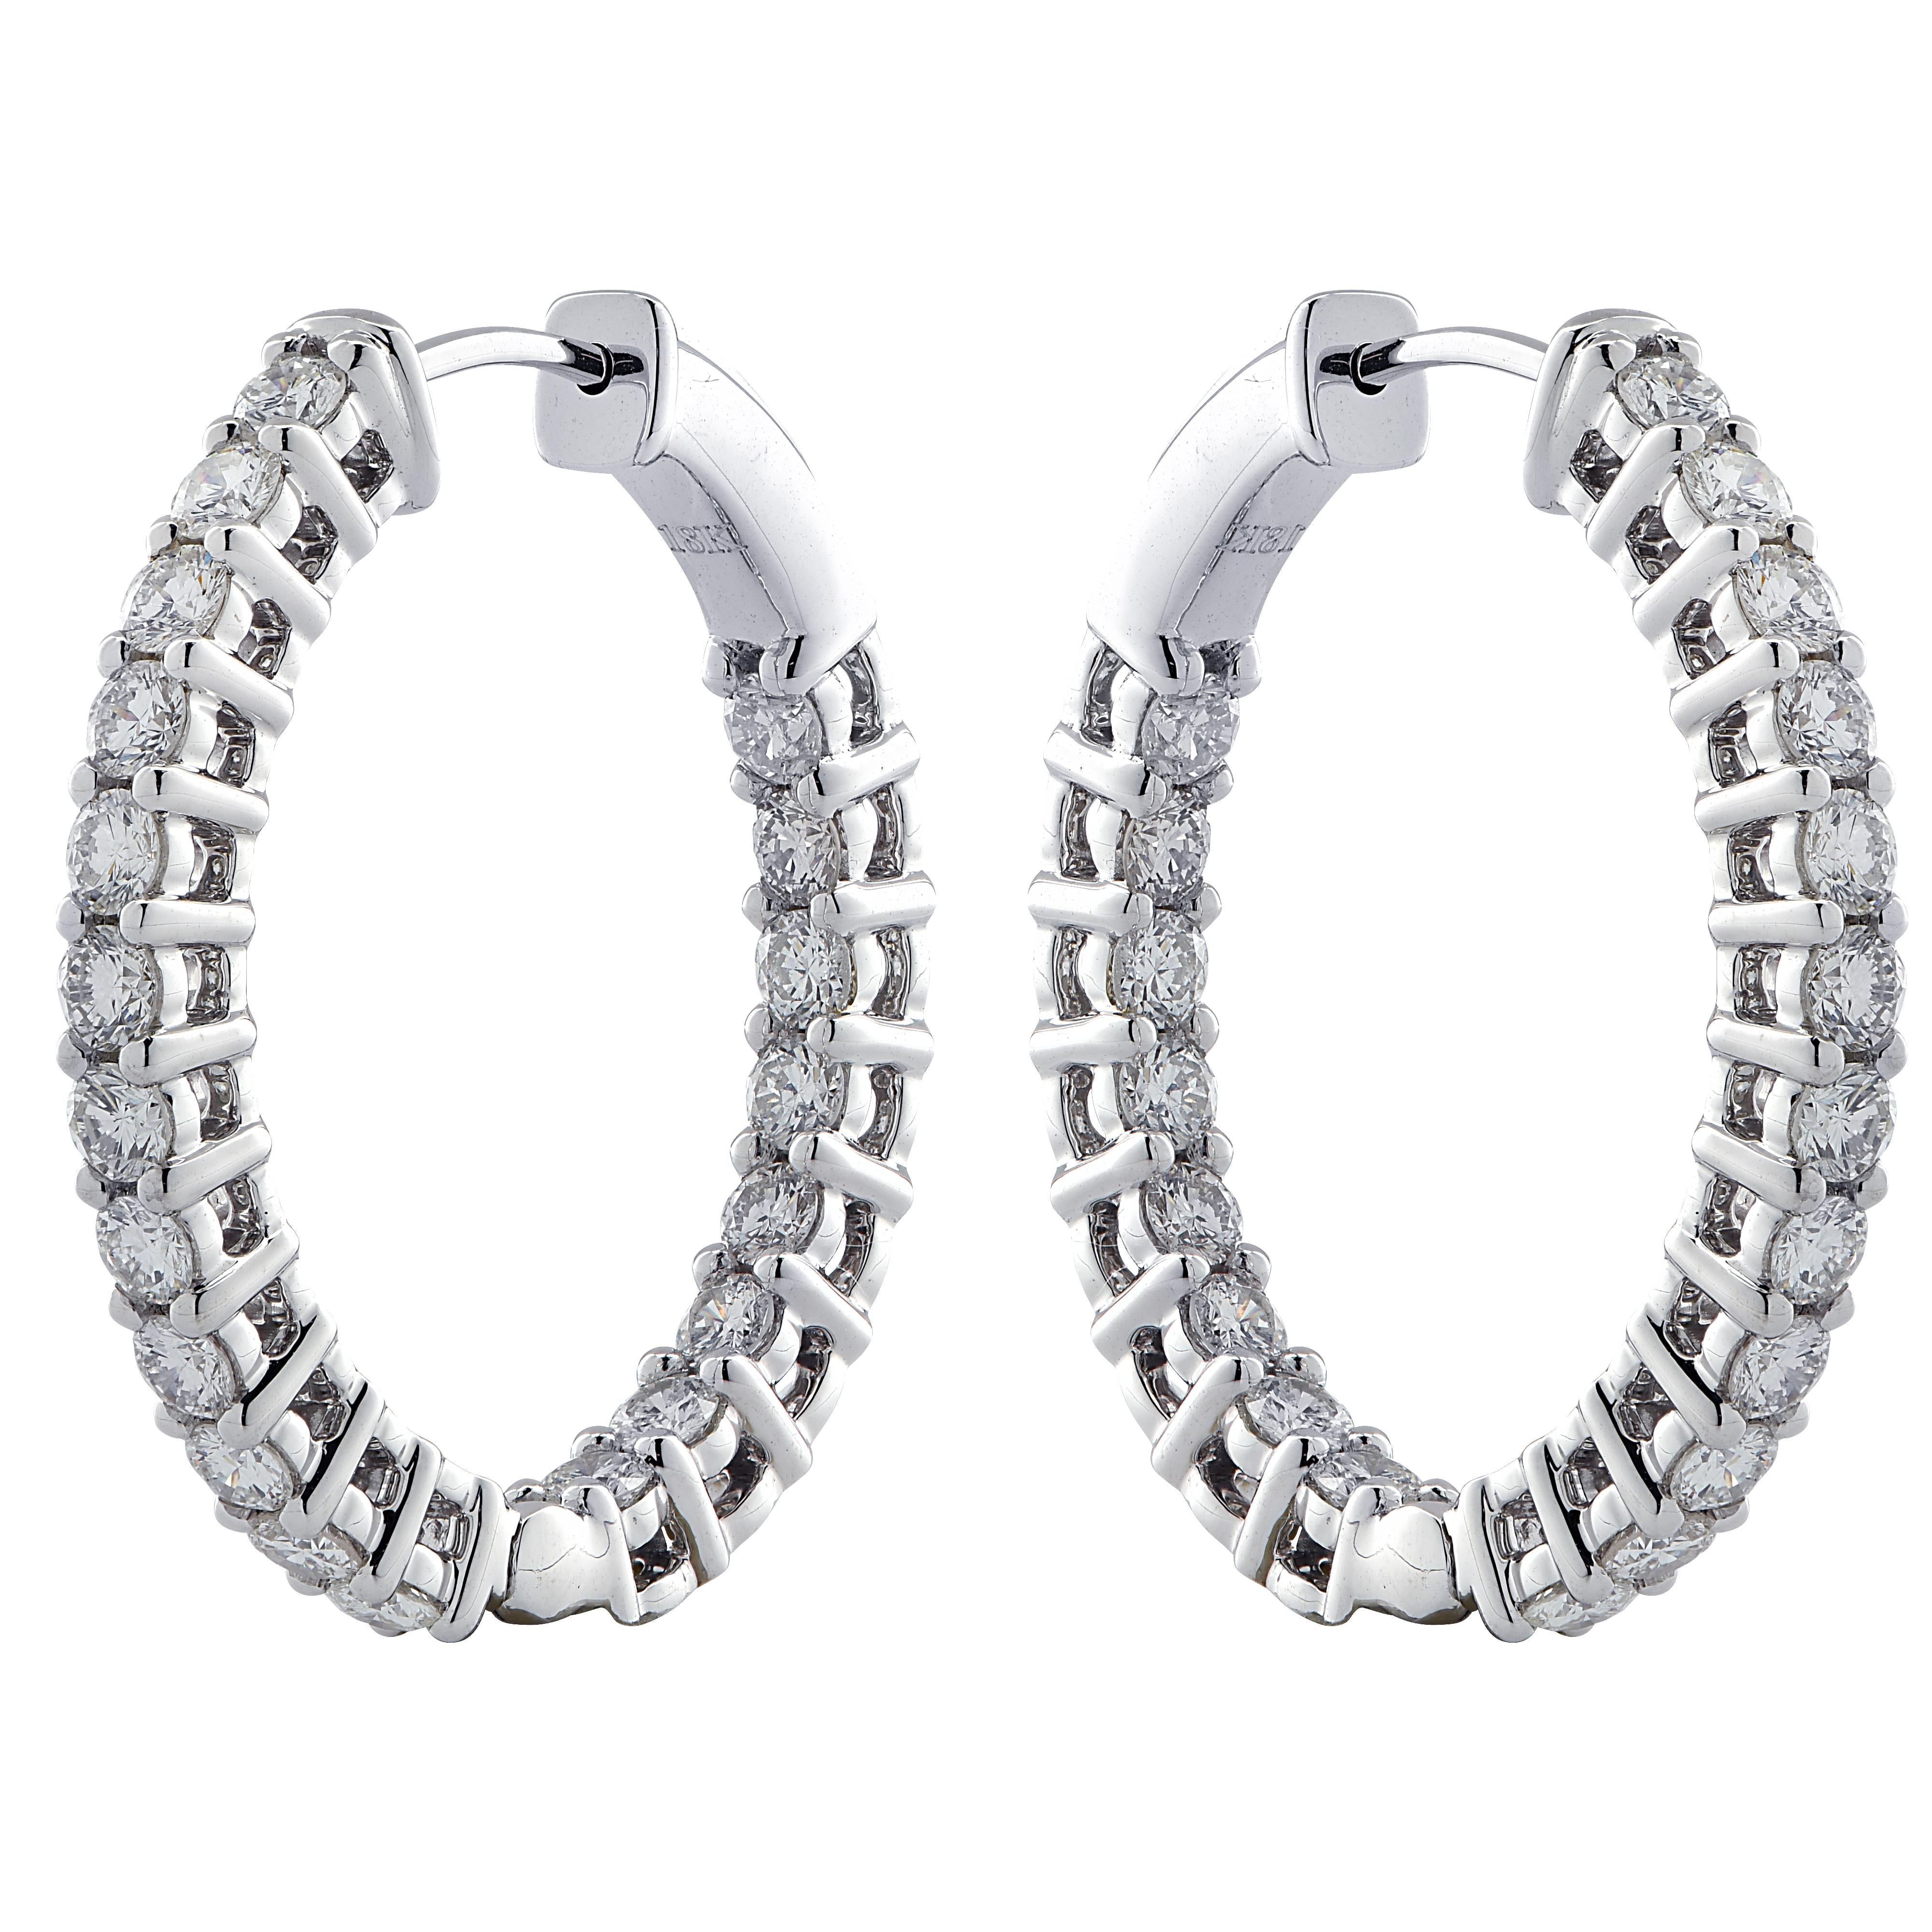 Spectacular Vivid Diamonds In/Out diamond hoop earrings crafted in 18 karat white gold showcasing 40 round brilliant cut diamonds weighing 2.32 carats total, G-H color, VS-SI clarity. Each diamond is carefully selected, perfectly matched and set on